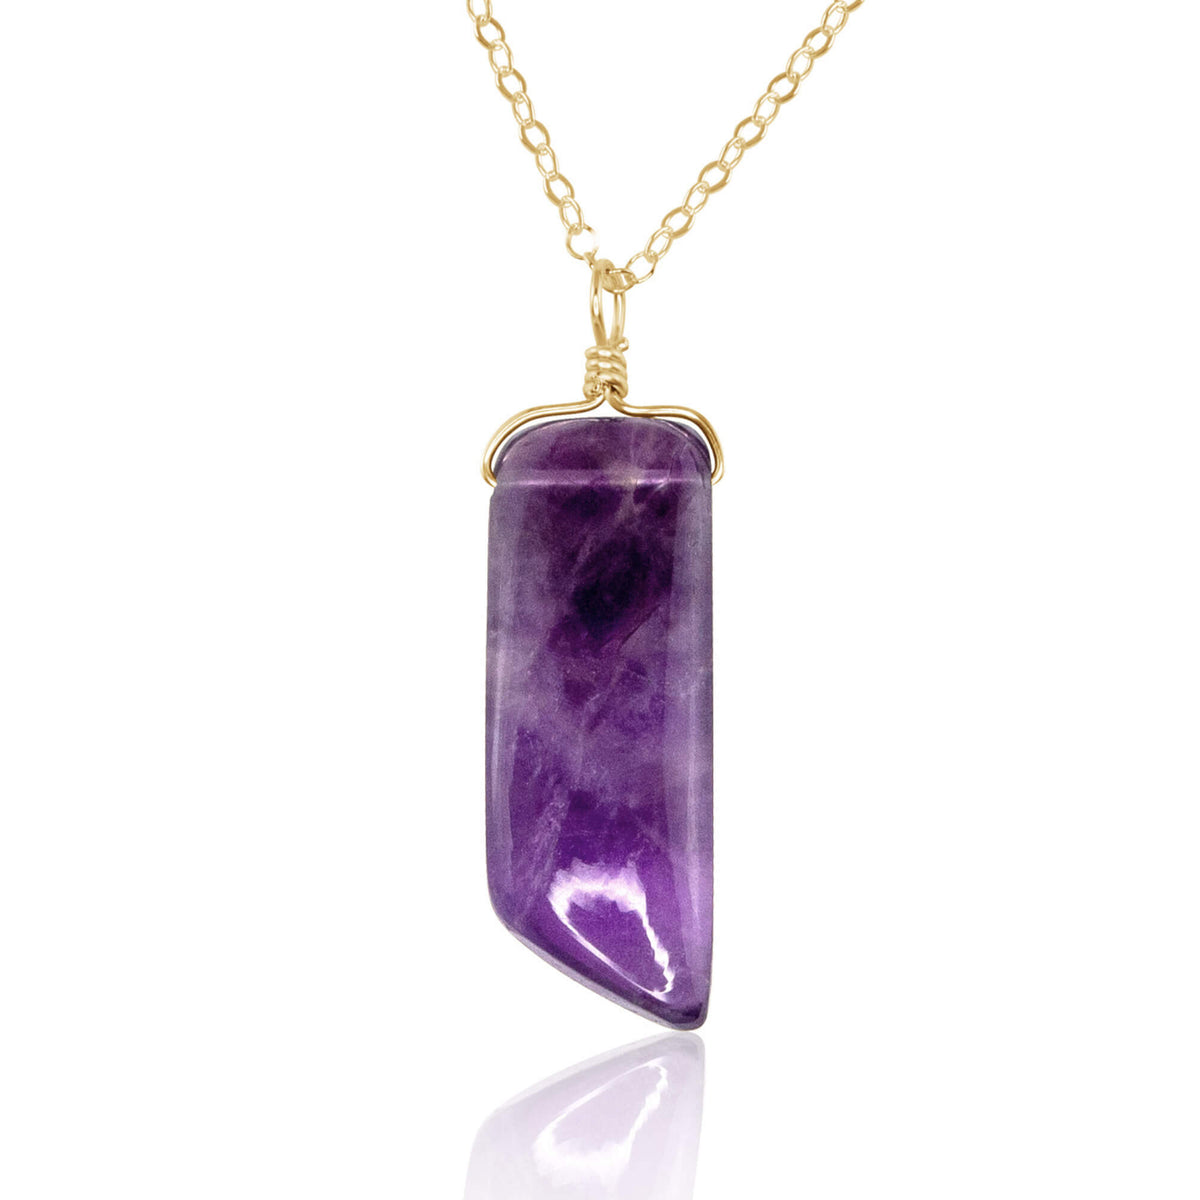 Smooth Point Pendant Necklace - Amethyst - 14K Gold Fill - Luna Tide Handmade Jewellery